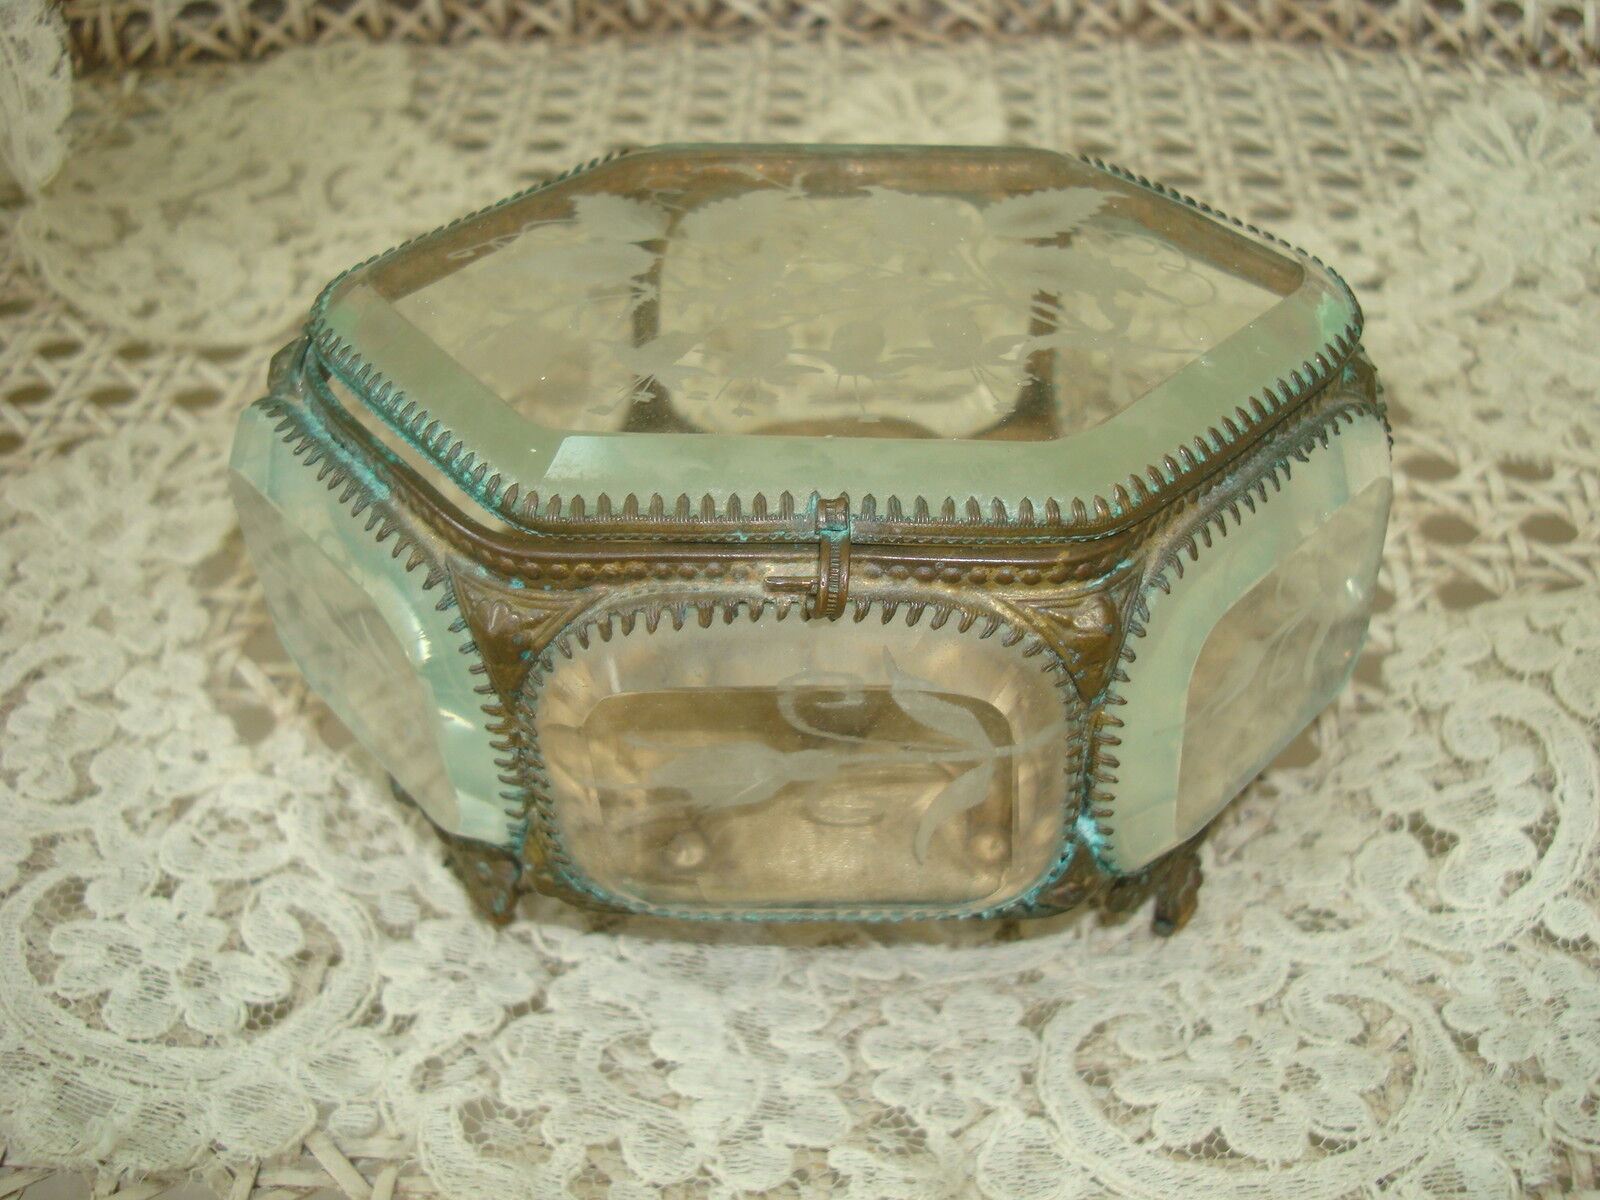 EXQUISITE LARGE ANTIQUE FRENCH CASKET BOX ORMOLU JEWELRY BOX FROM FRANCE